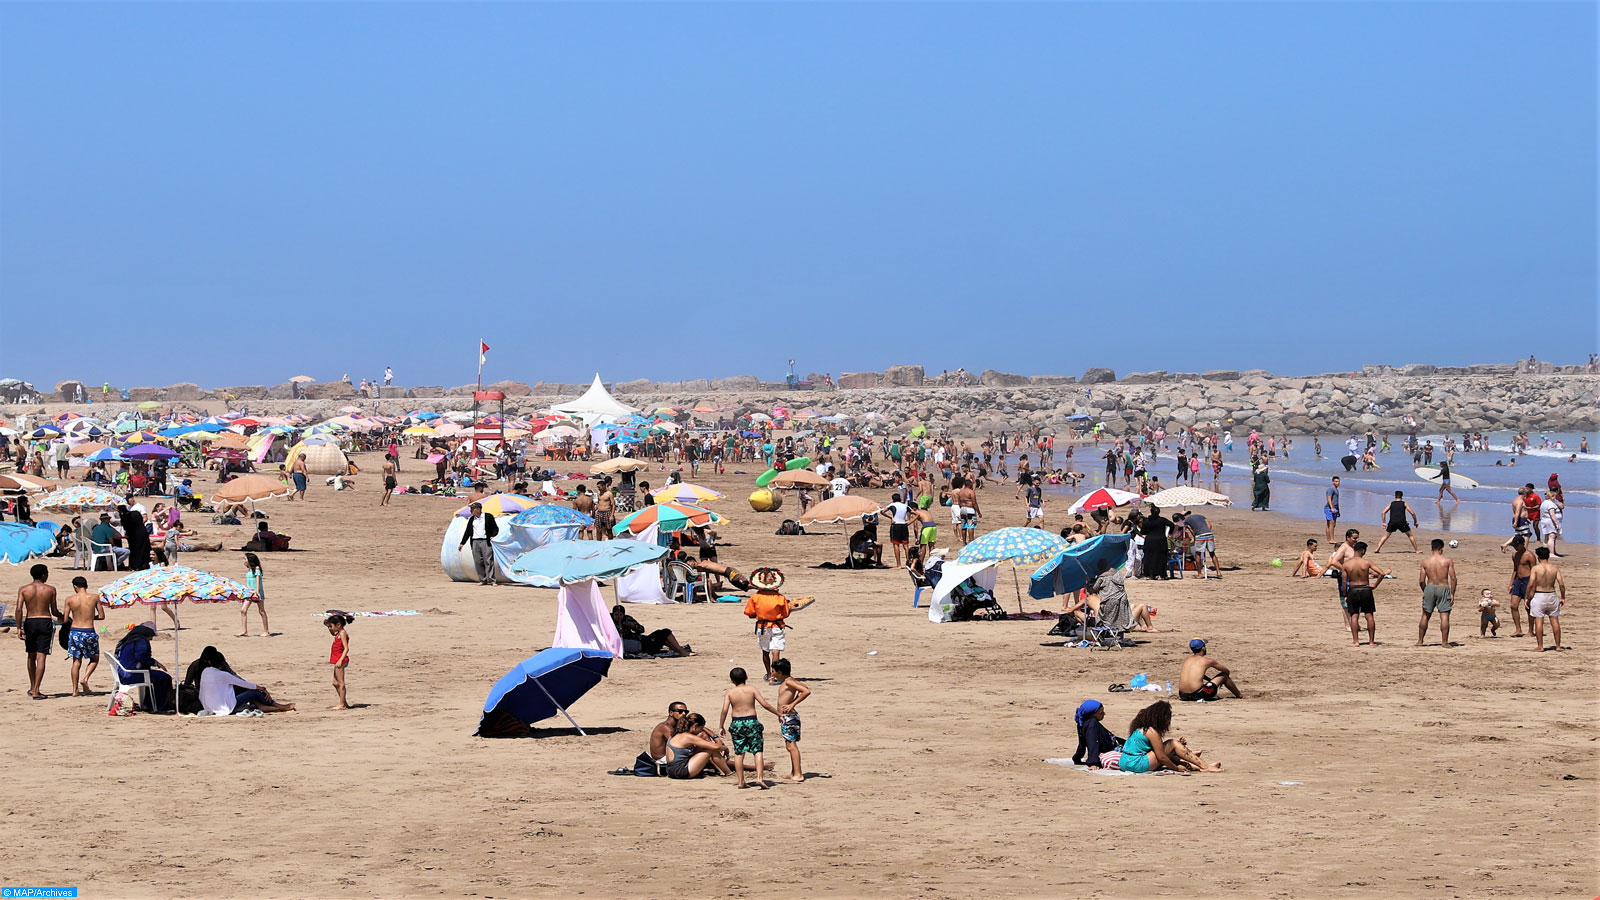 Tensions Escalate in Agadir Due to “Umbrellas” and Wild “Parking”